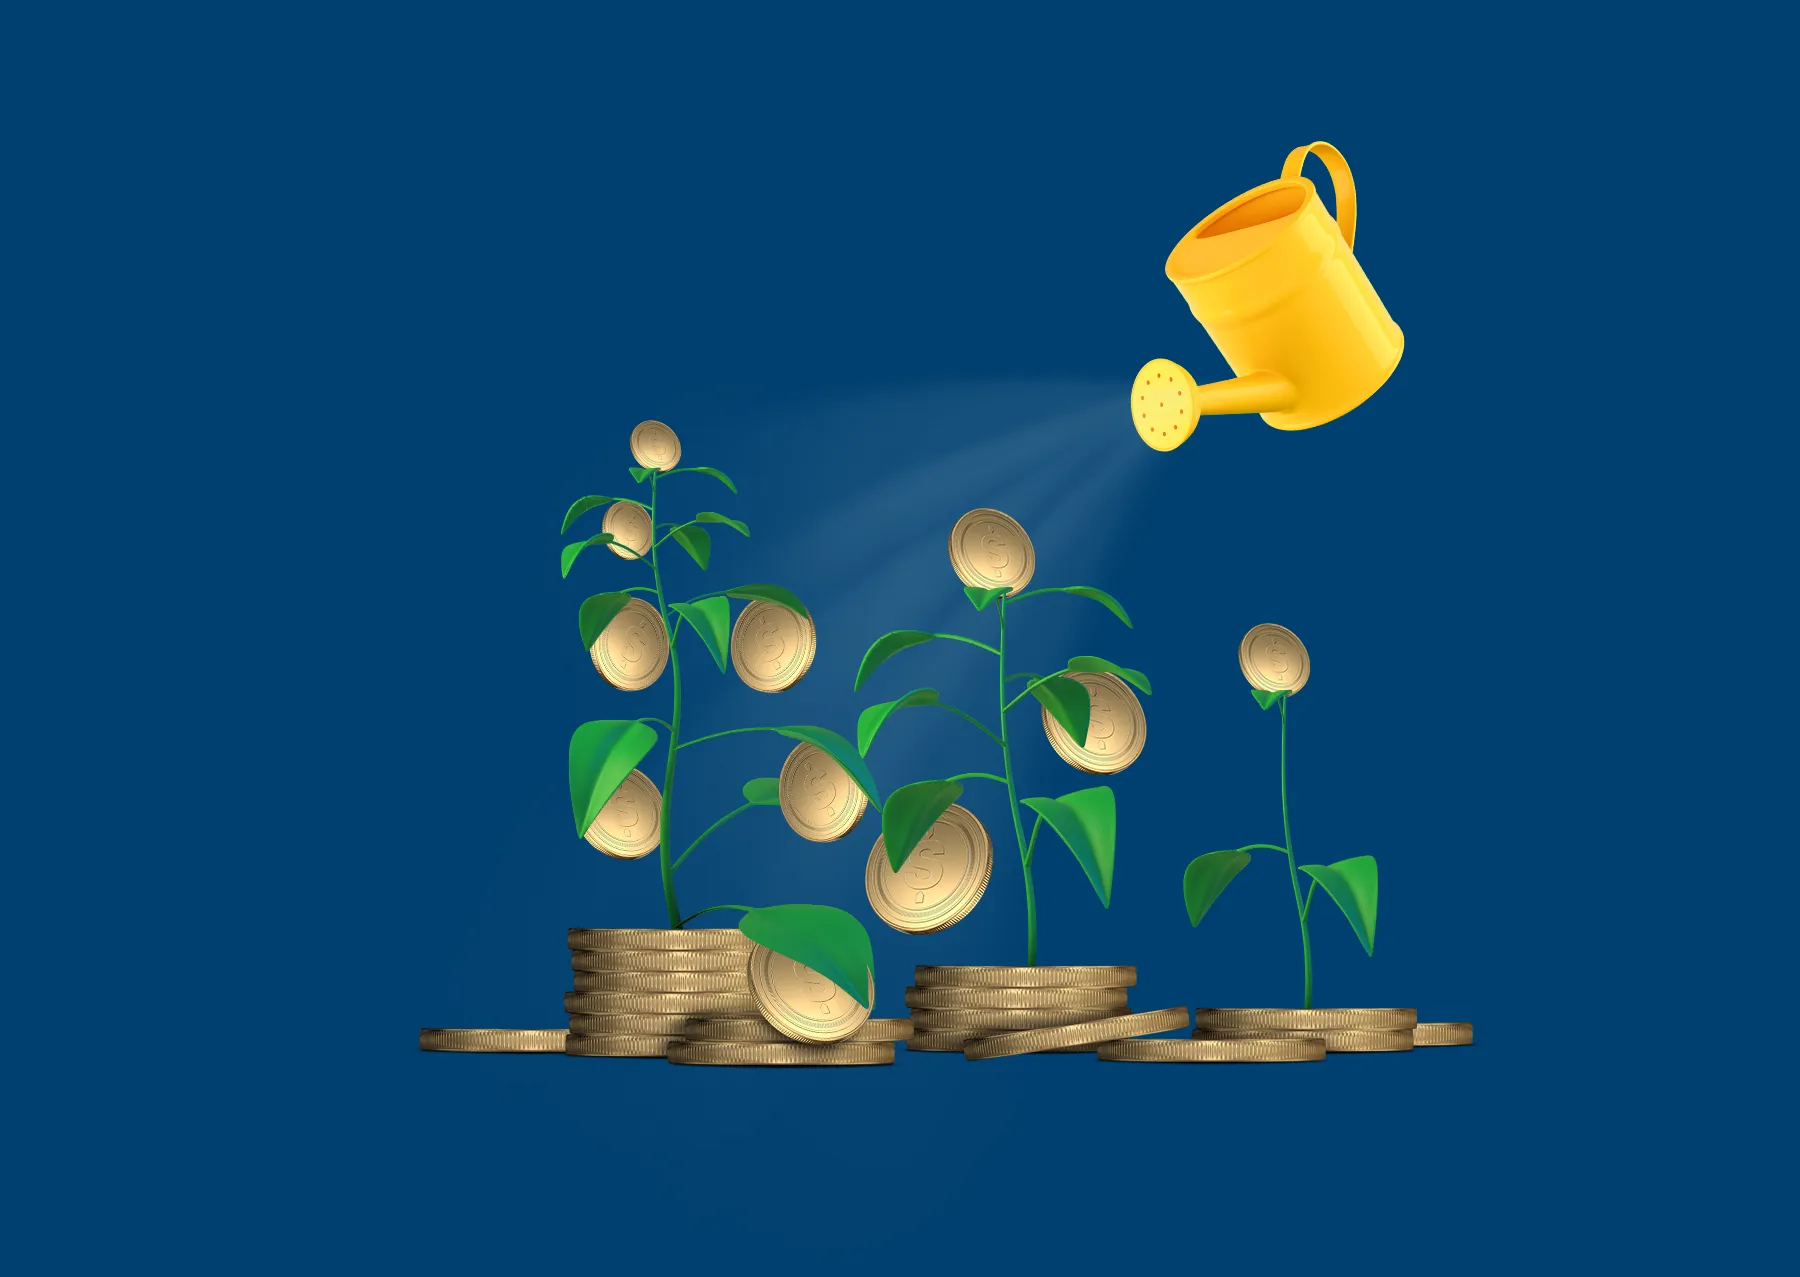 Three plants blooming with coins, from small to big, are being watered with a watering can.